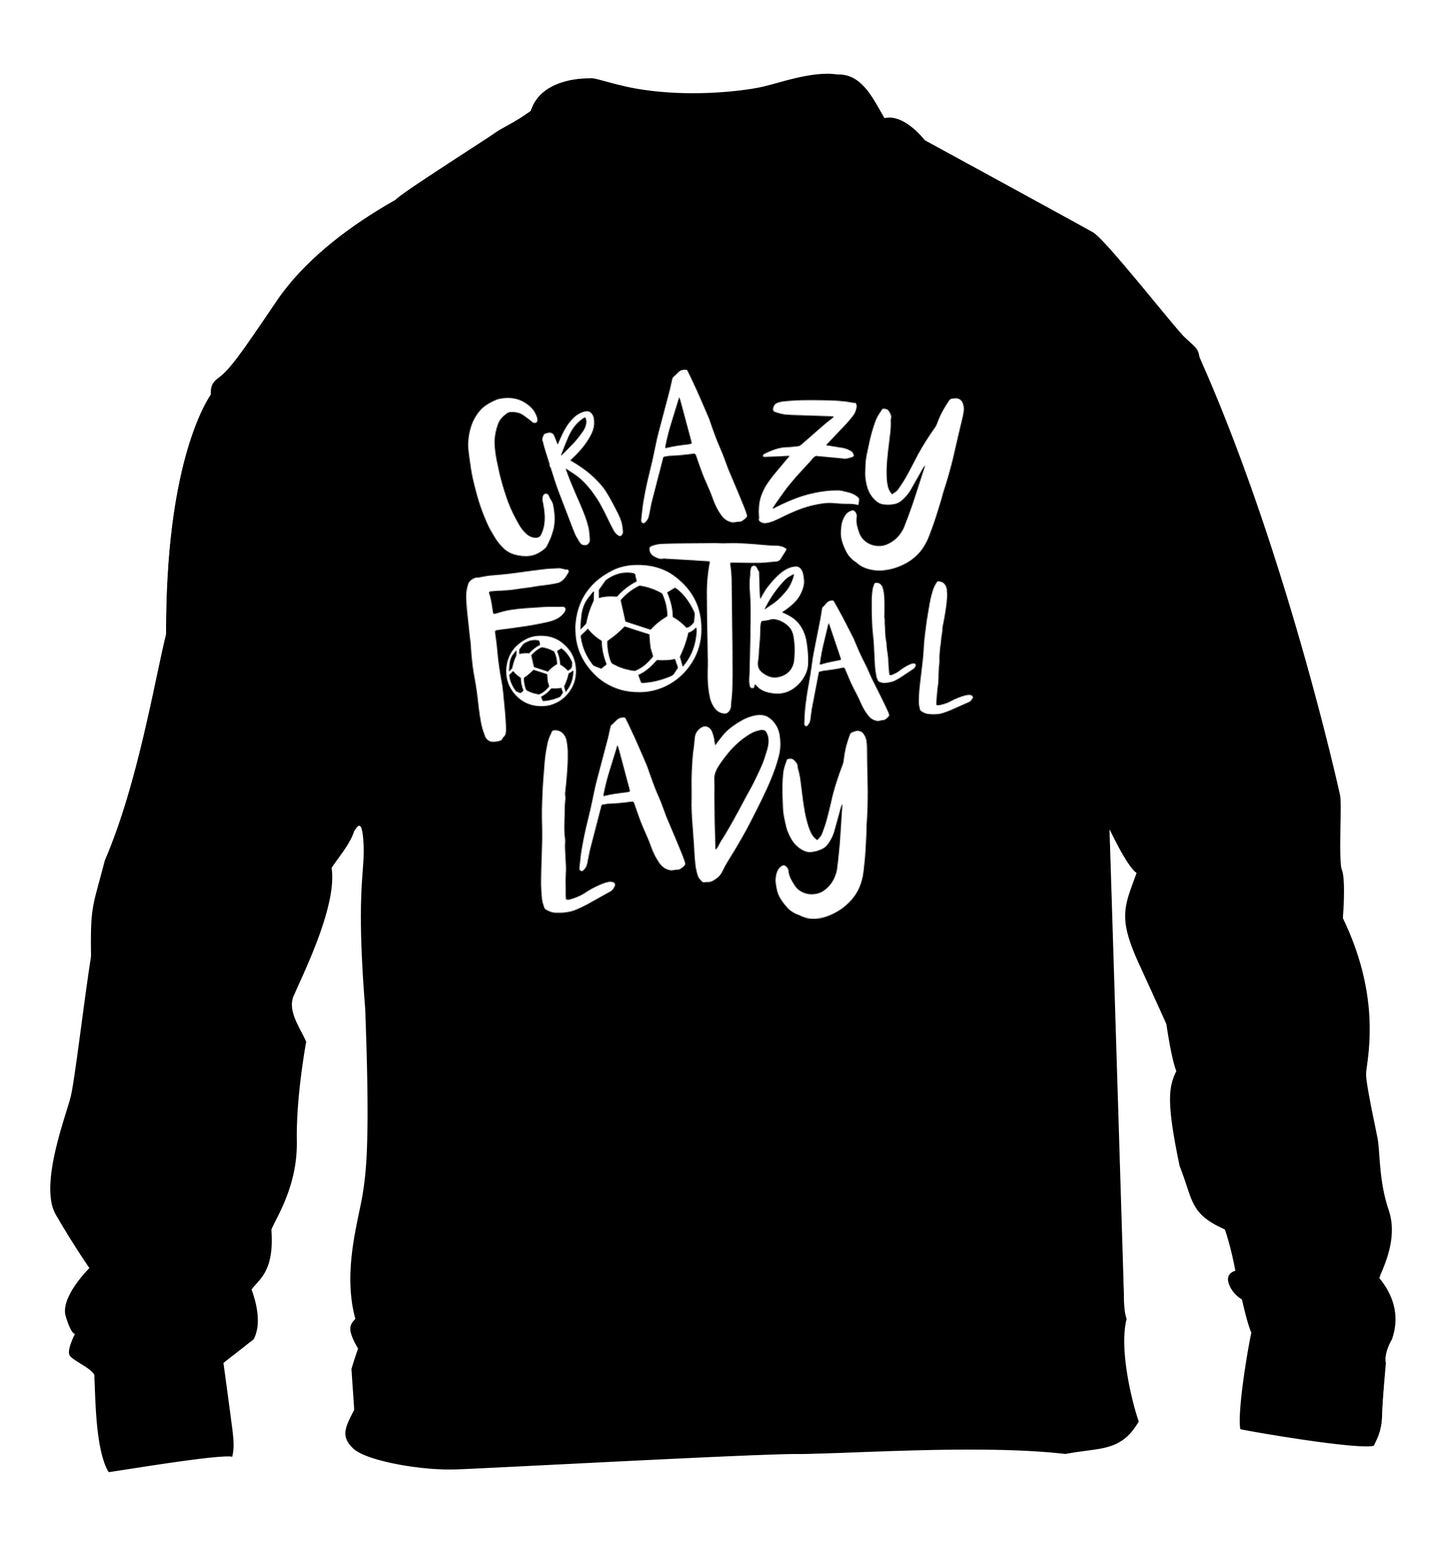 Crazy football lady children's black sweater 12-14 Years